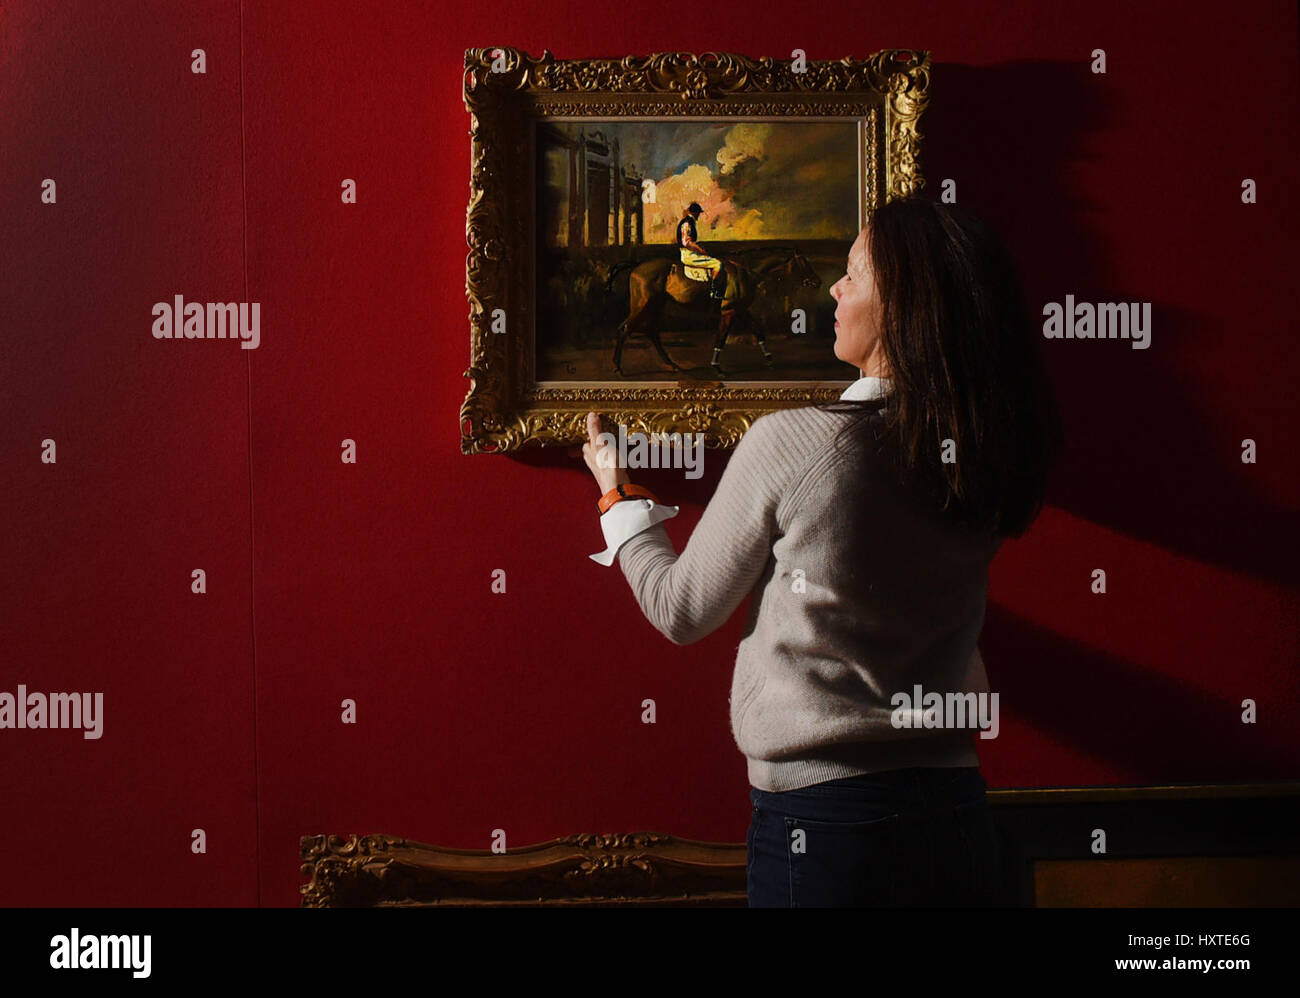 Oxford, UK. 29th Mar, 2017. Antique dealers setting up for The Cotswolds Art and Antiques Dealers' Association (CADA) Fair, which runs over the weekend, 30th March - 2nd April at Blenheim Palace, Woodstock, Oxfordshire, UK. Beth Marsden of Trinity House Paintings hangs 'After The Race Newbury' by Sir Alfred Mannings. Picture by Richard Cave 29.03.17 Credit: Richard Cave/Alamy Live News Stock Photo